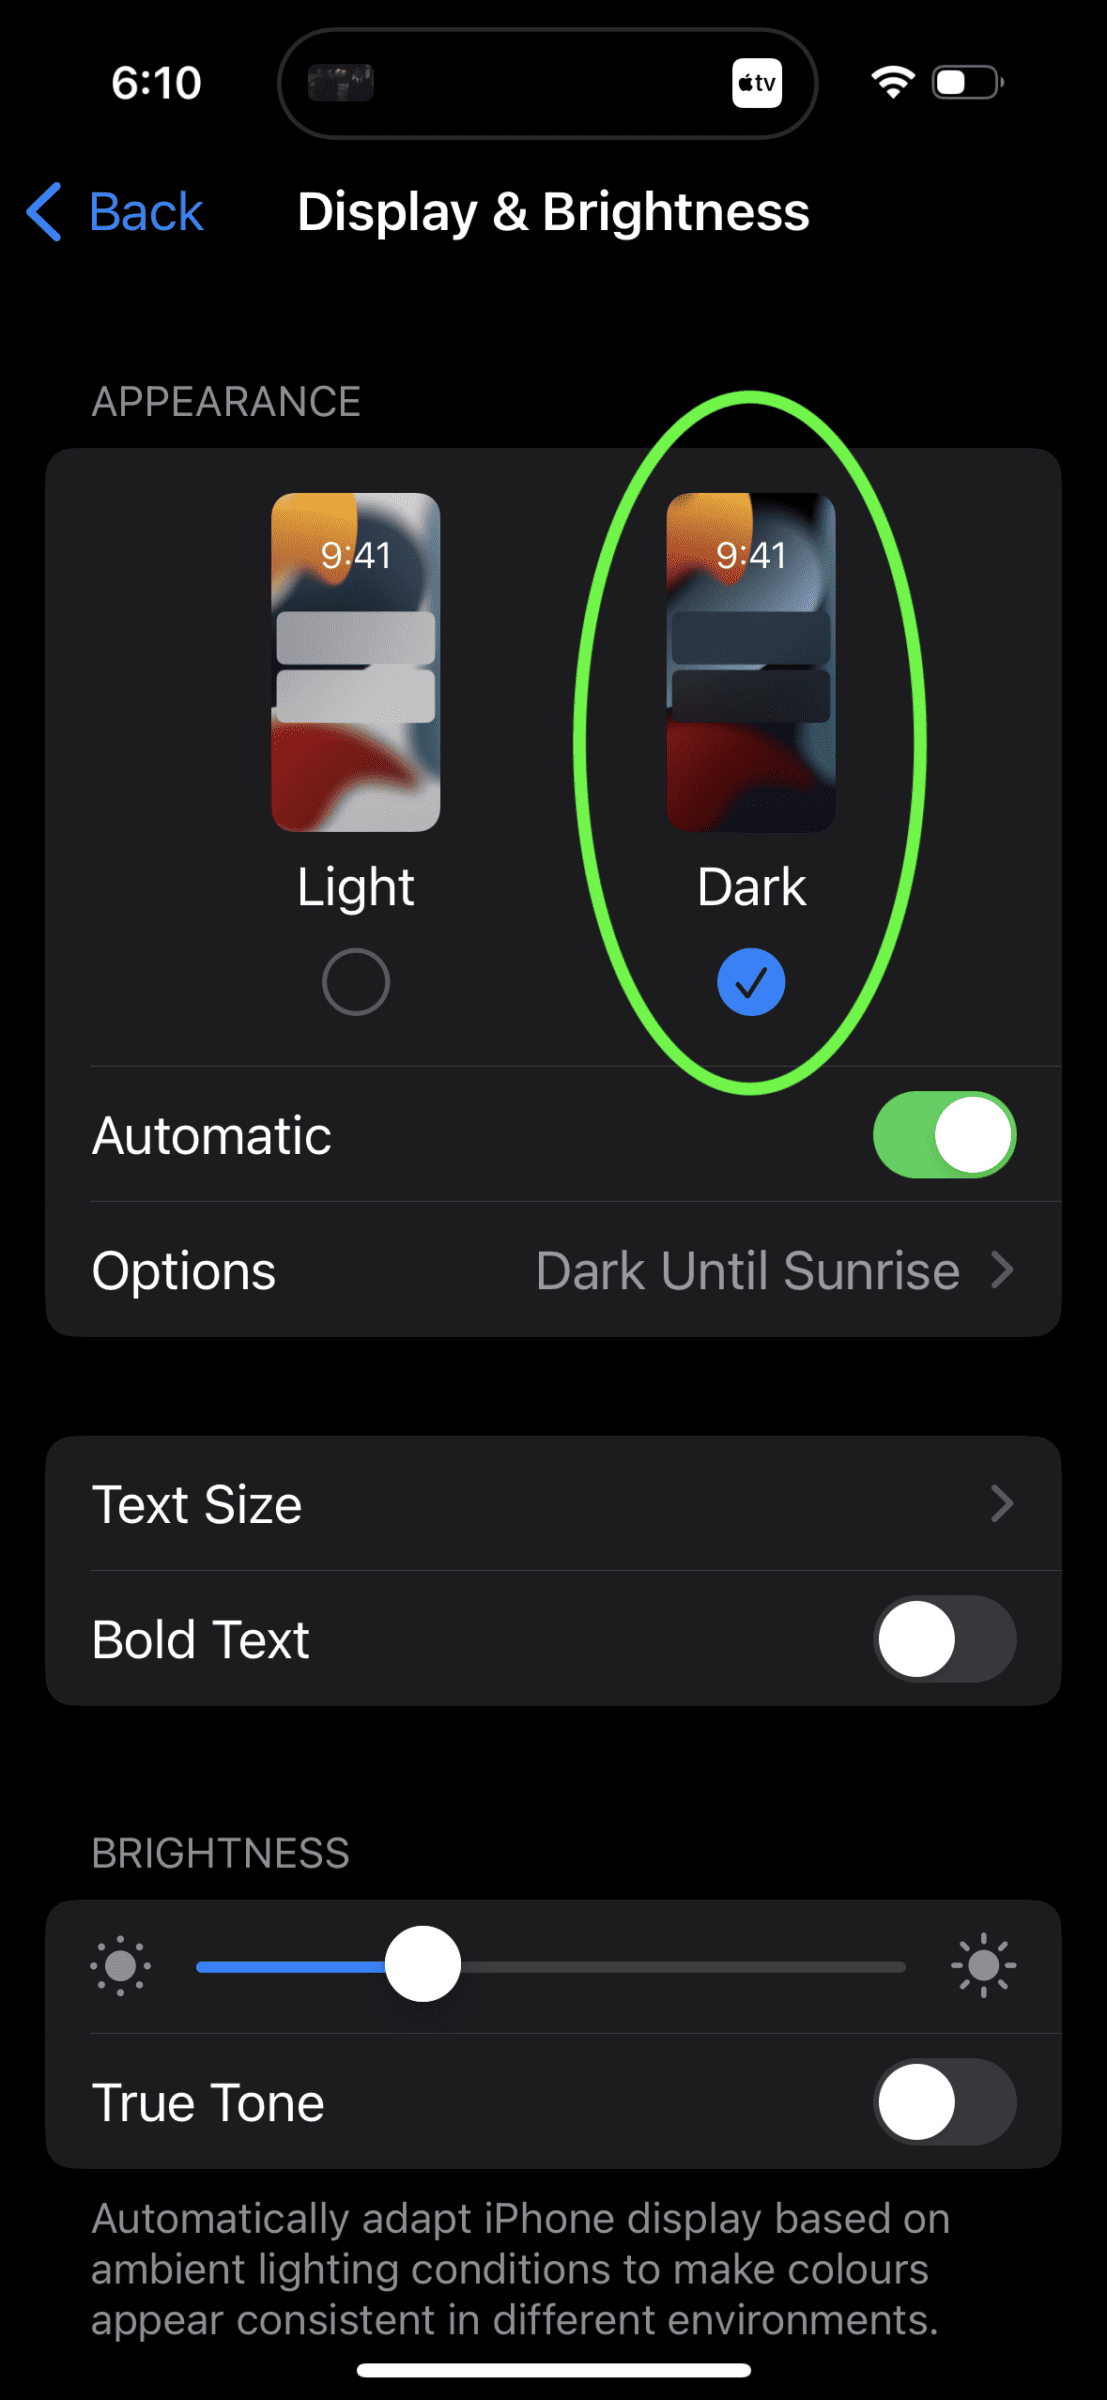 A screenshot of the appearance settings within the display and brightness settings on an iPhone. The display is in dark mode.